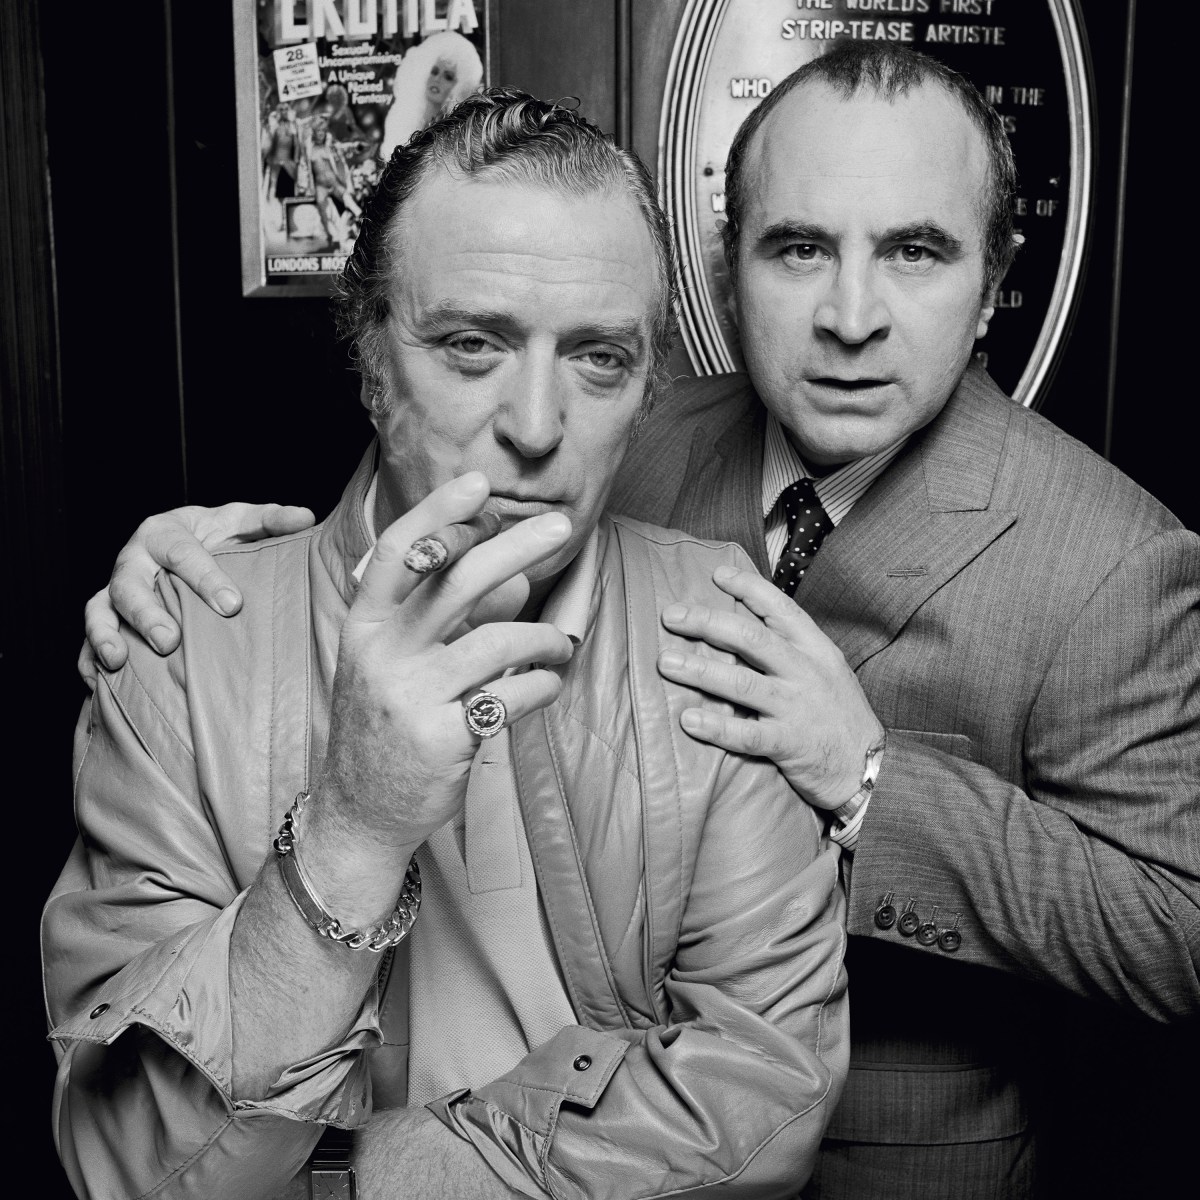 It was Bob Hoskins who had approached Caine to appear in the film as crime boss Mortwell in the 1986 film “Mona Lisa.”<br><br><meta charset="utf-8">By Terry O'Neill, courtesy of ACC Art Books